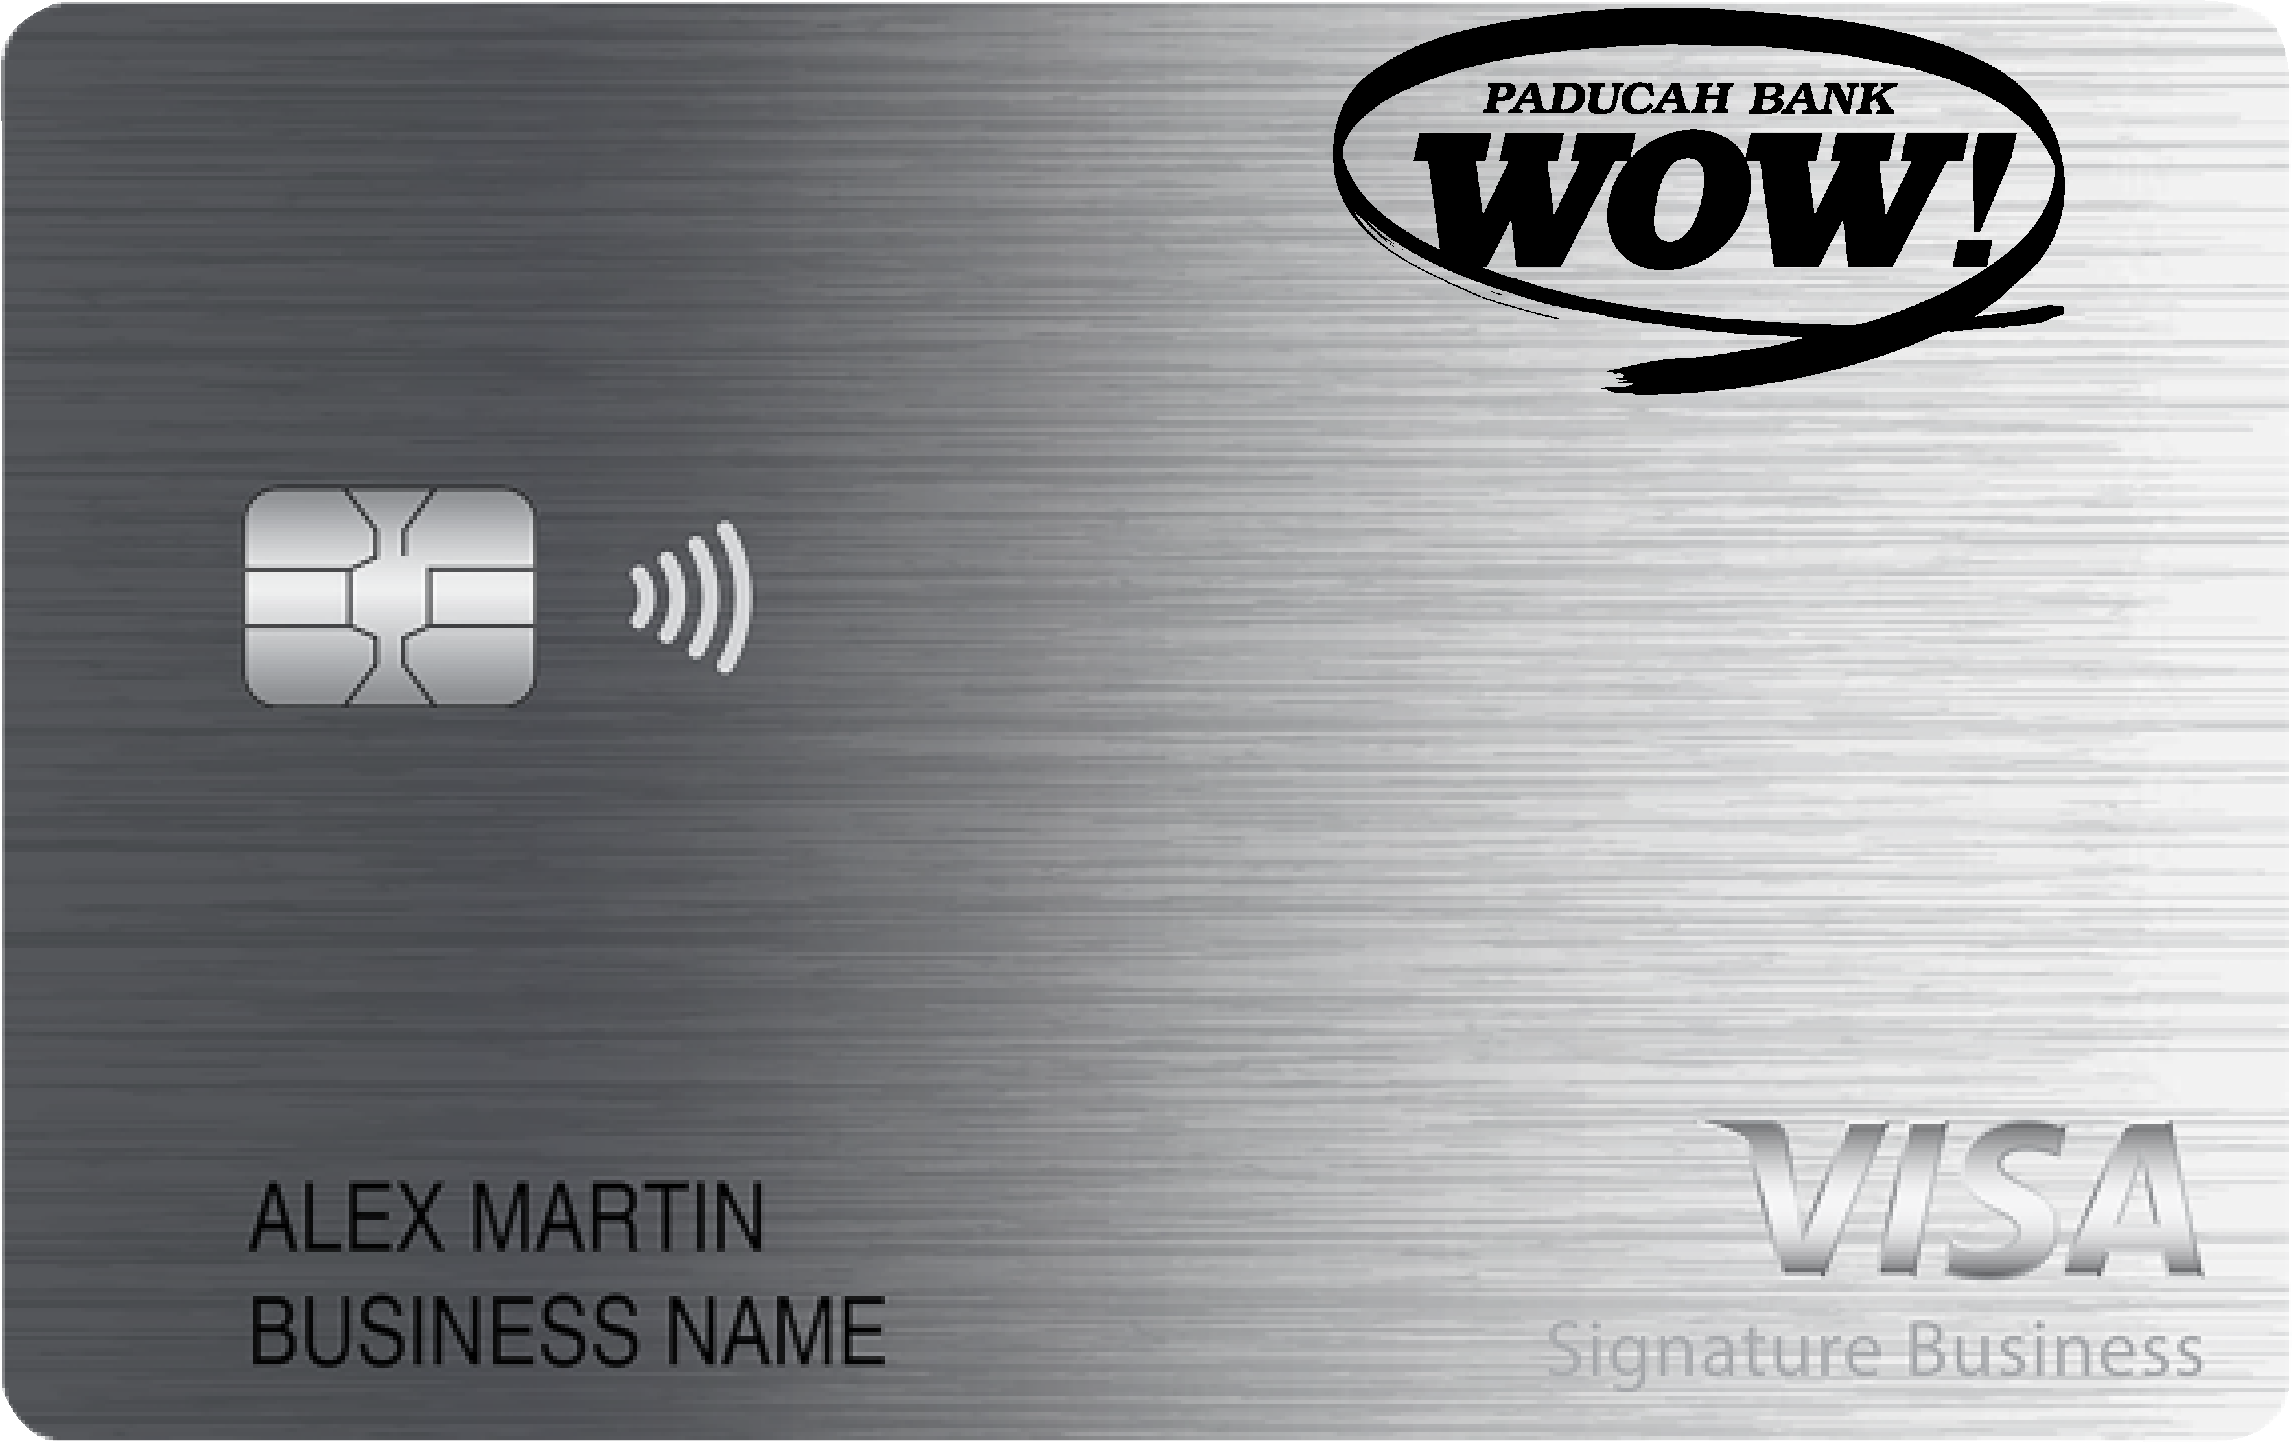 The Paducah Bank and Trust Company Smart Business Rewards Card